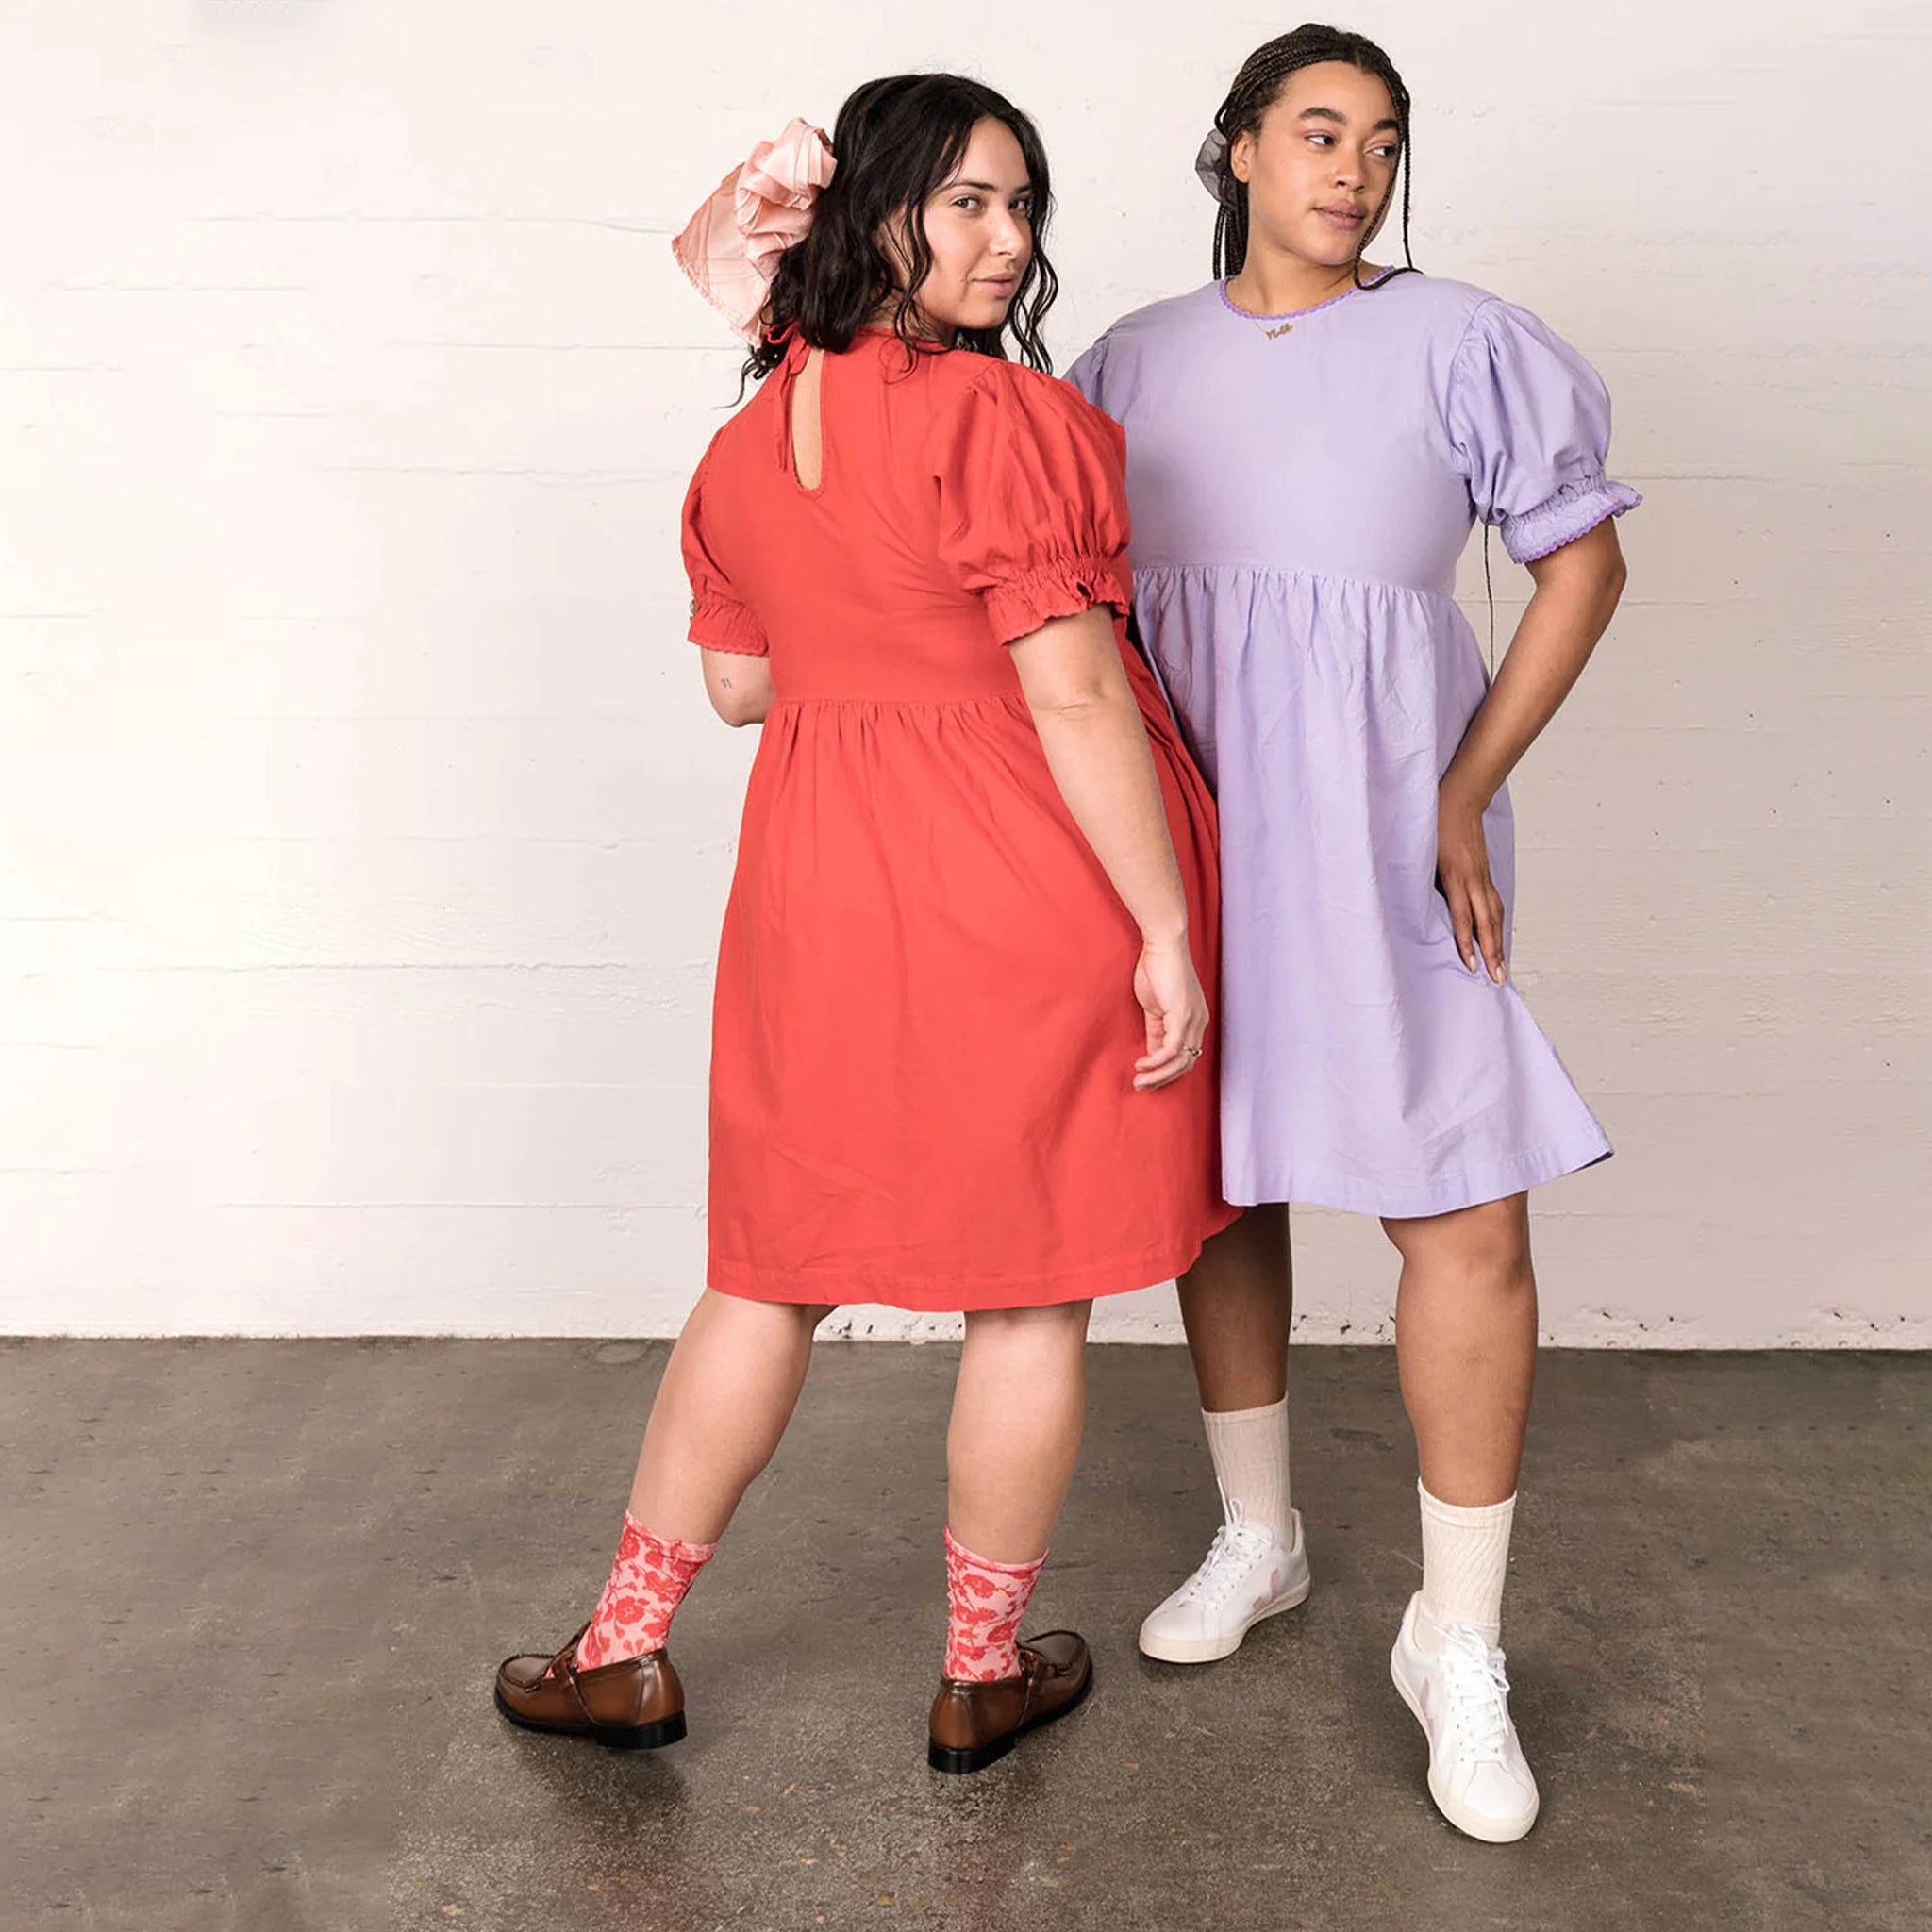 In front of a cream wall is a model wearing a lavender baby doll style dress with puffy sleeve details next to another model wearing the same dress in red. 